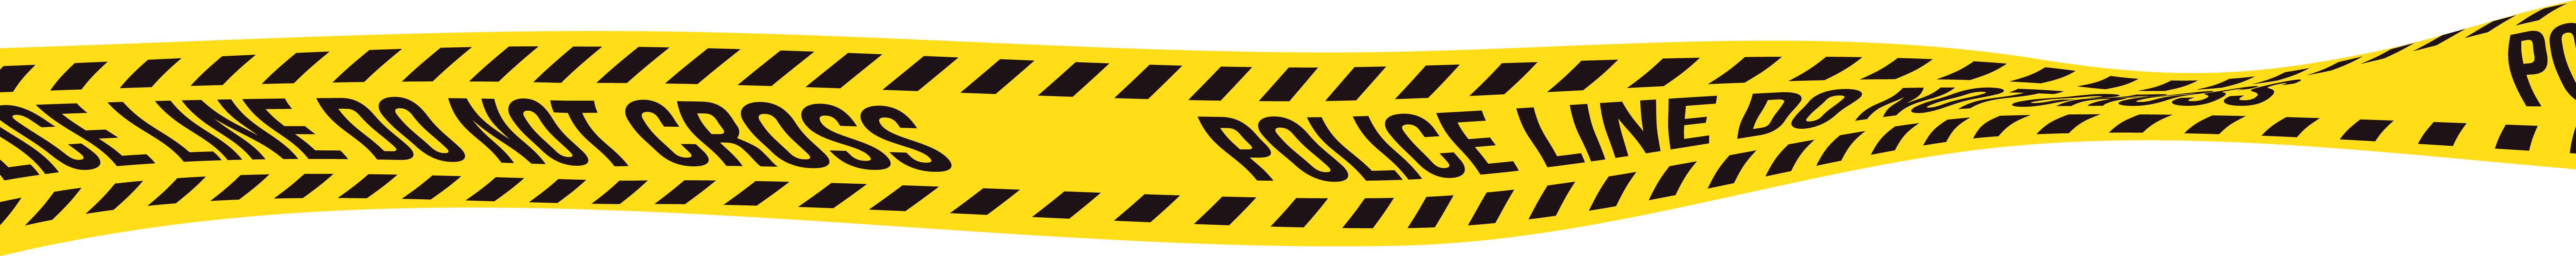 Police Caution Tape PNG HD Quality